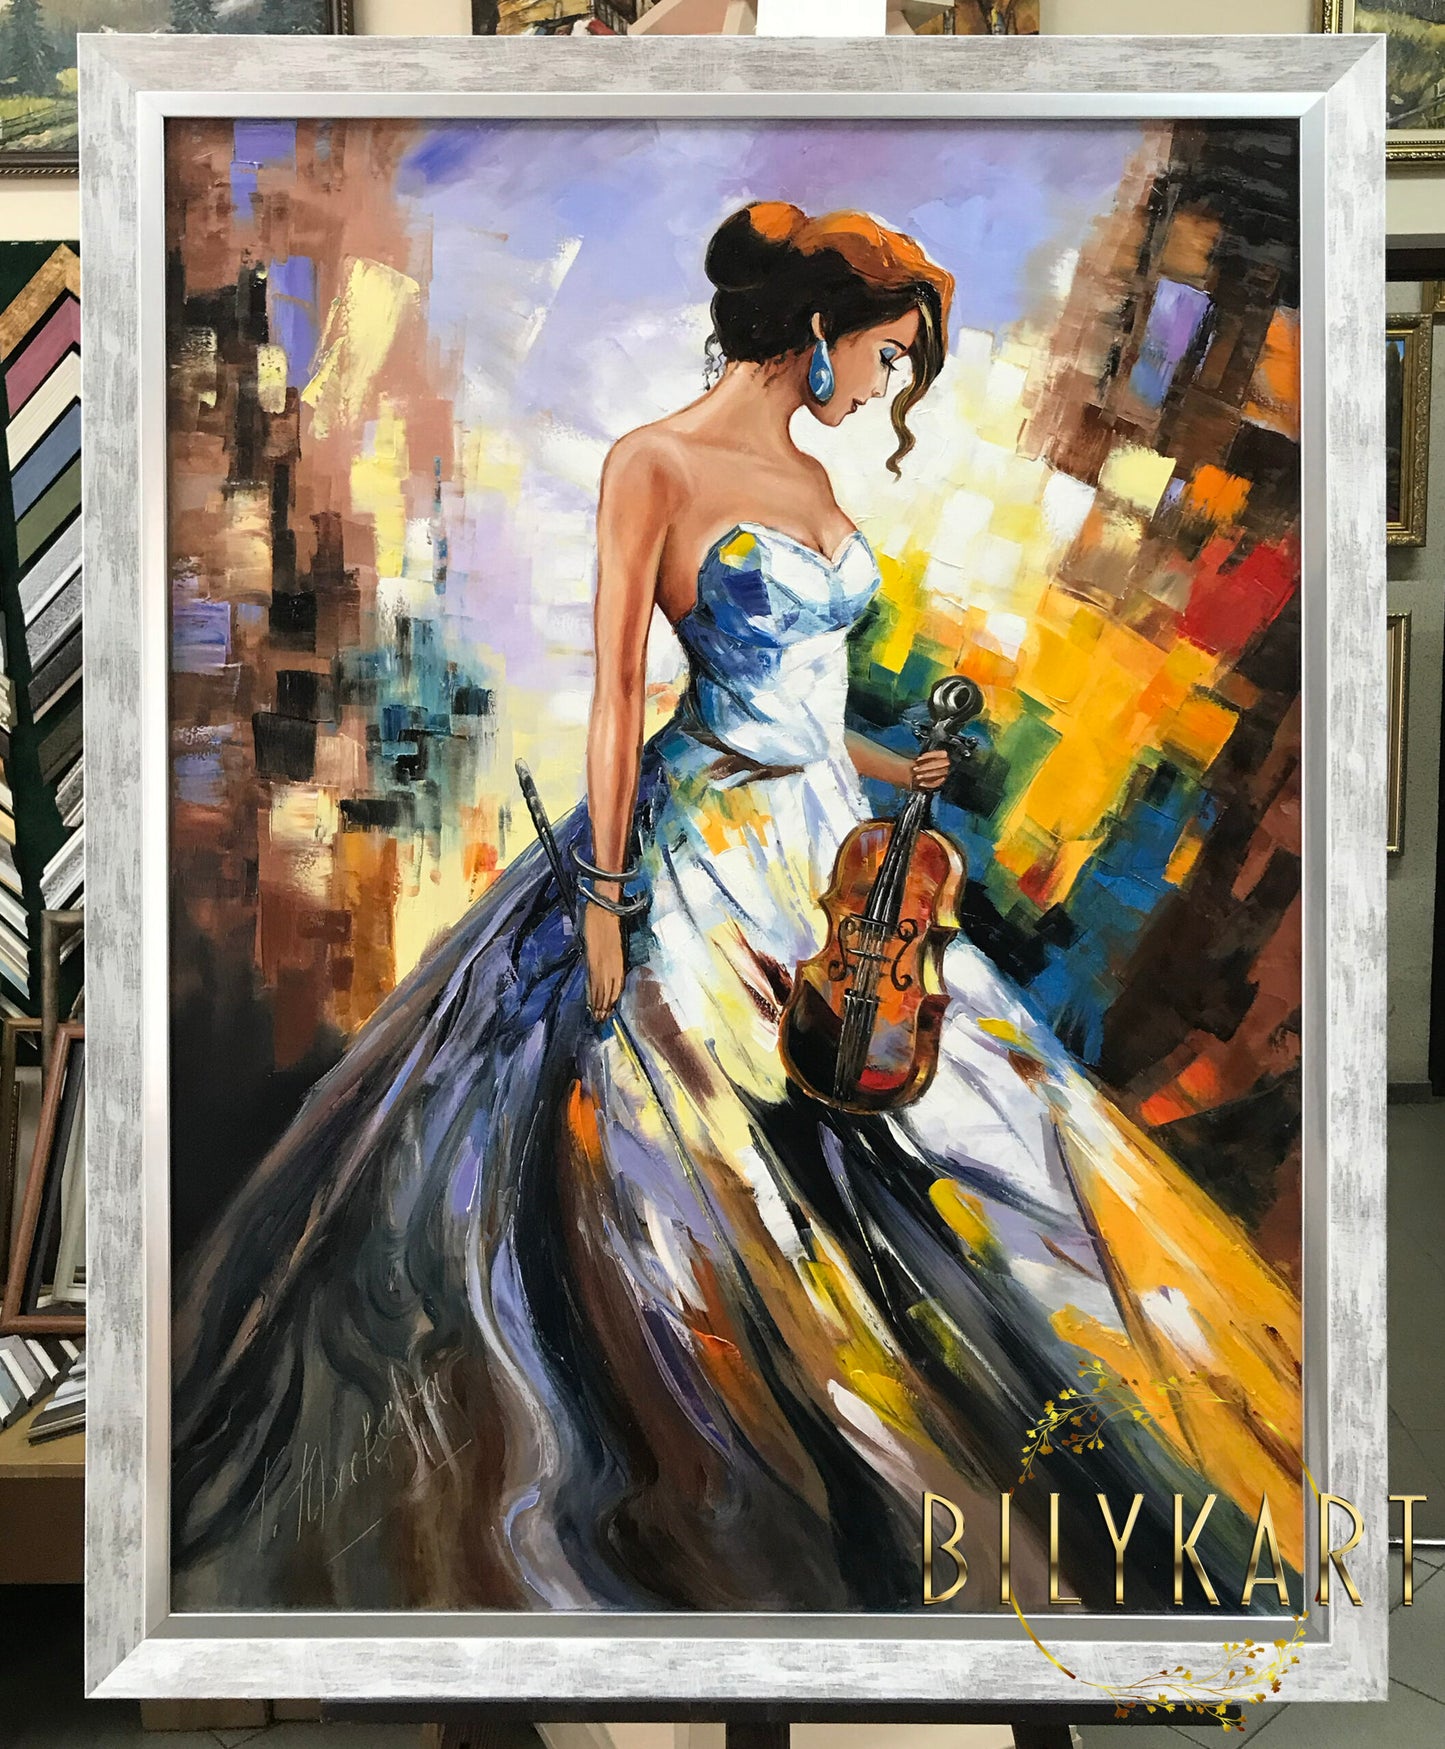 Abstract Woman in Dress Oil Painting Original Modern Music Oil Painting Abstract Female Art Framed The Violinist Painting with White Frame